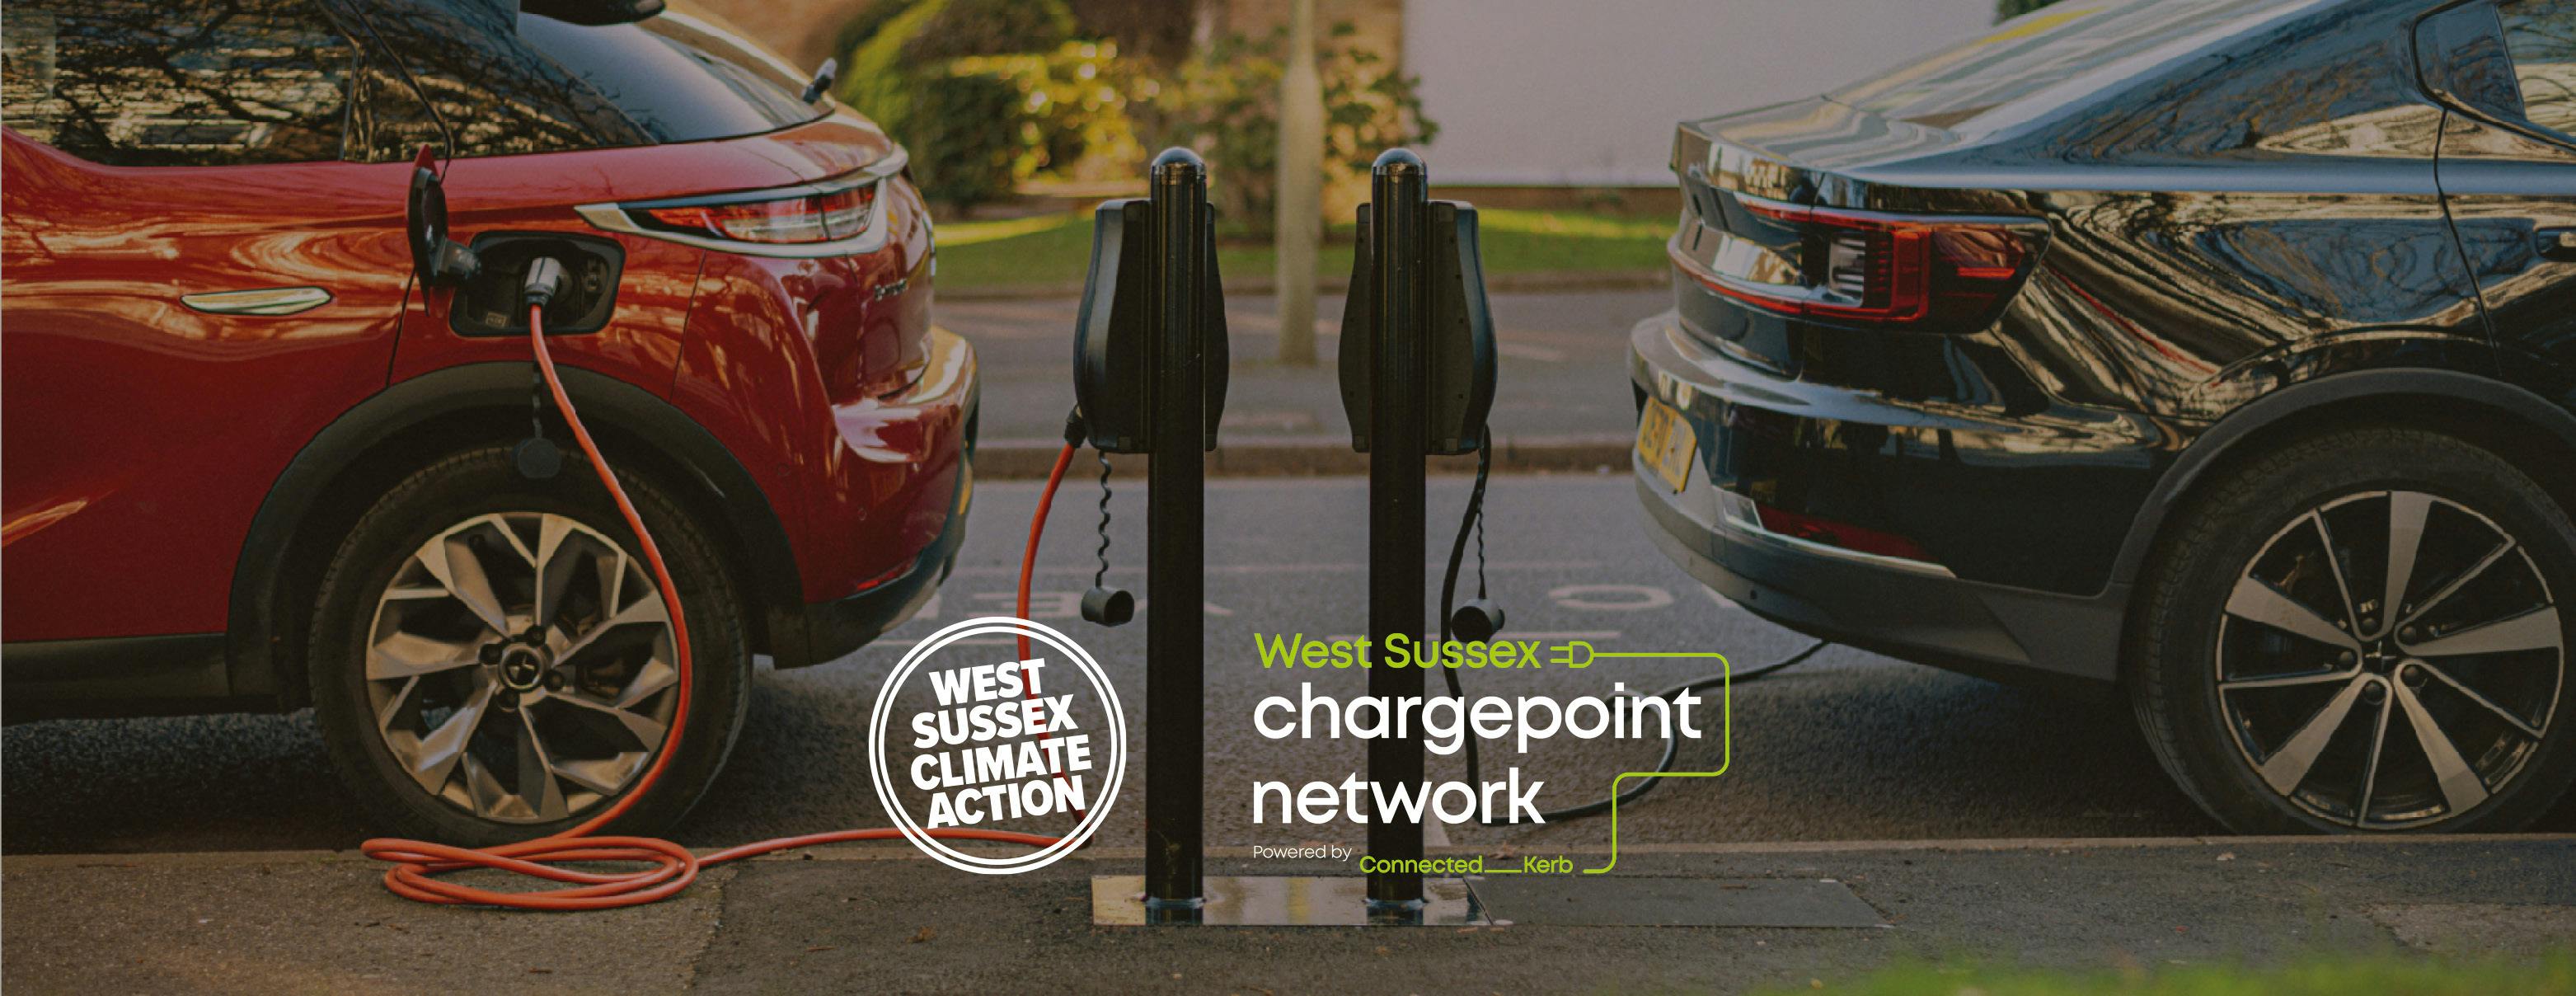 Cars charging at EV chargepoints . West Sussex Climate Action, West Susses Chargepoint Network logos. 